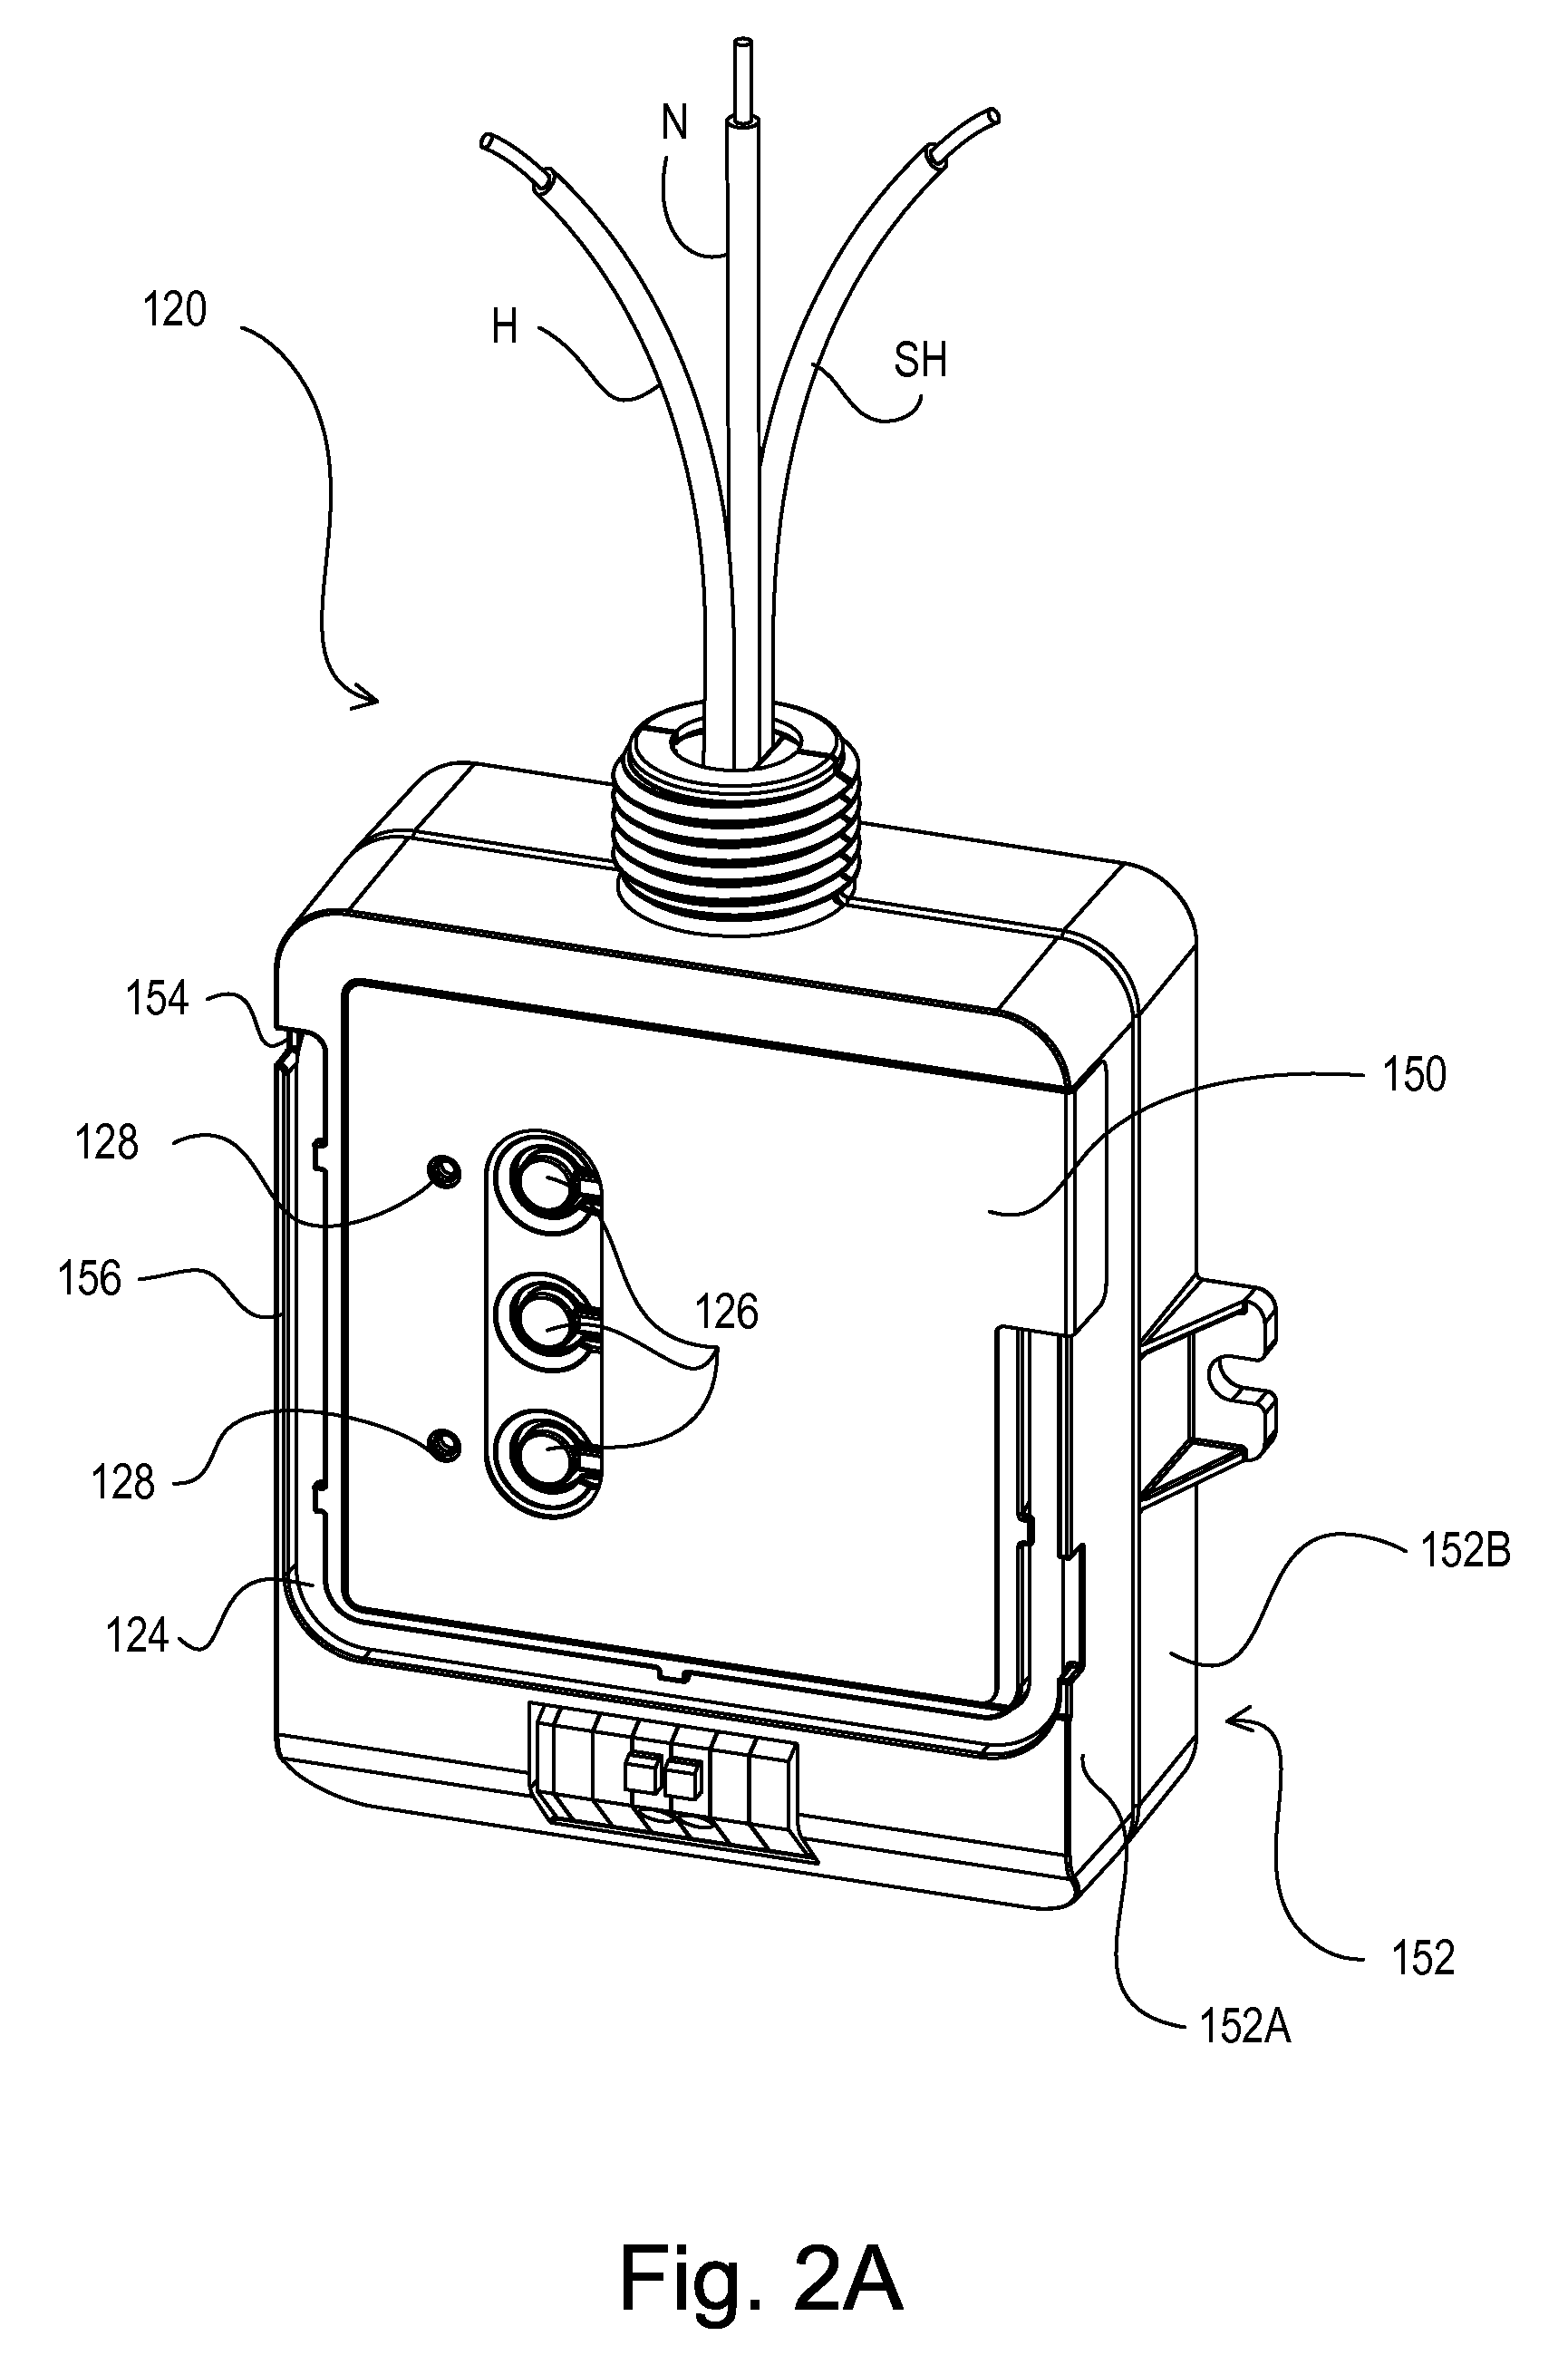 Load control device having an electrically isolated antenna